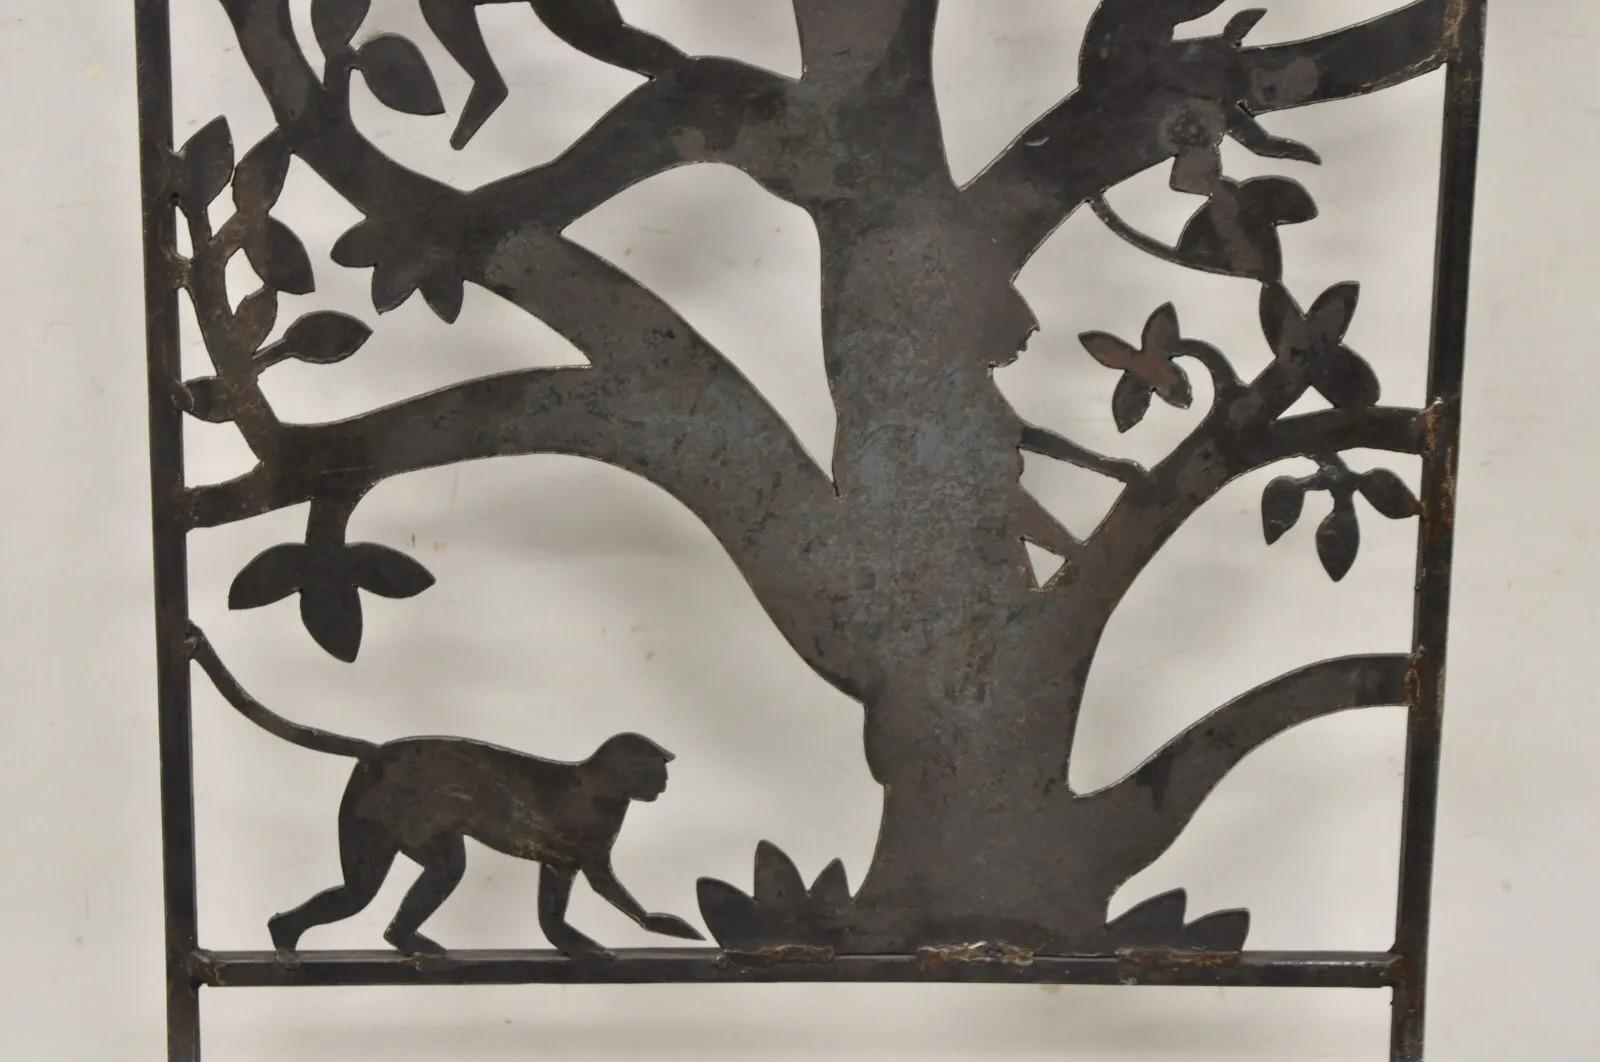 20th Century Vintage Wrought Iron Figural Monkeys In Tree Folding Garden Accent Chair For Sale